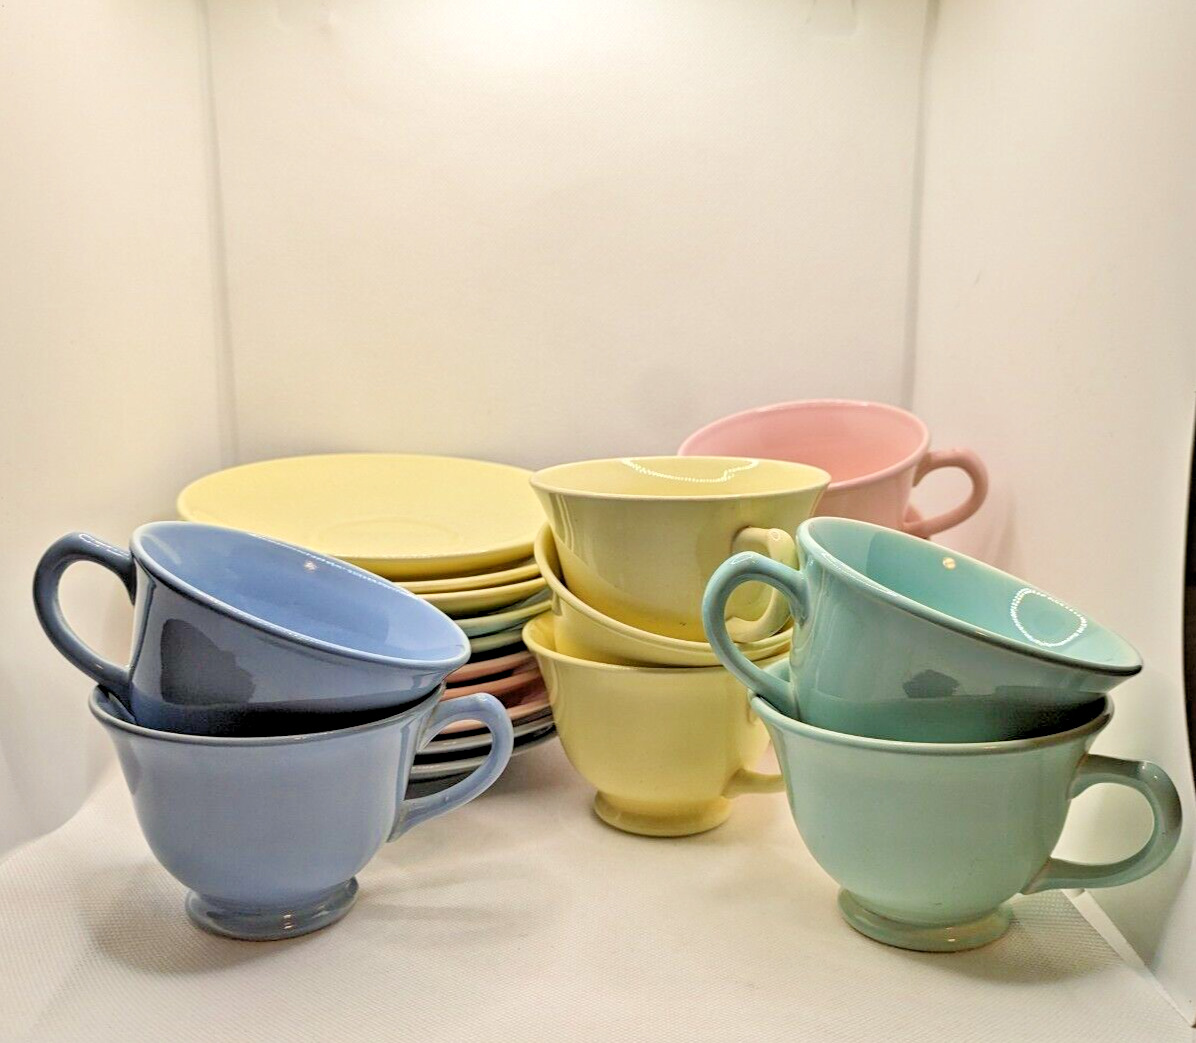 LU-RAY Pastel Teacup & Saucers Pink Blue Green Yellow - 8 sets; 16 Pieces Total